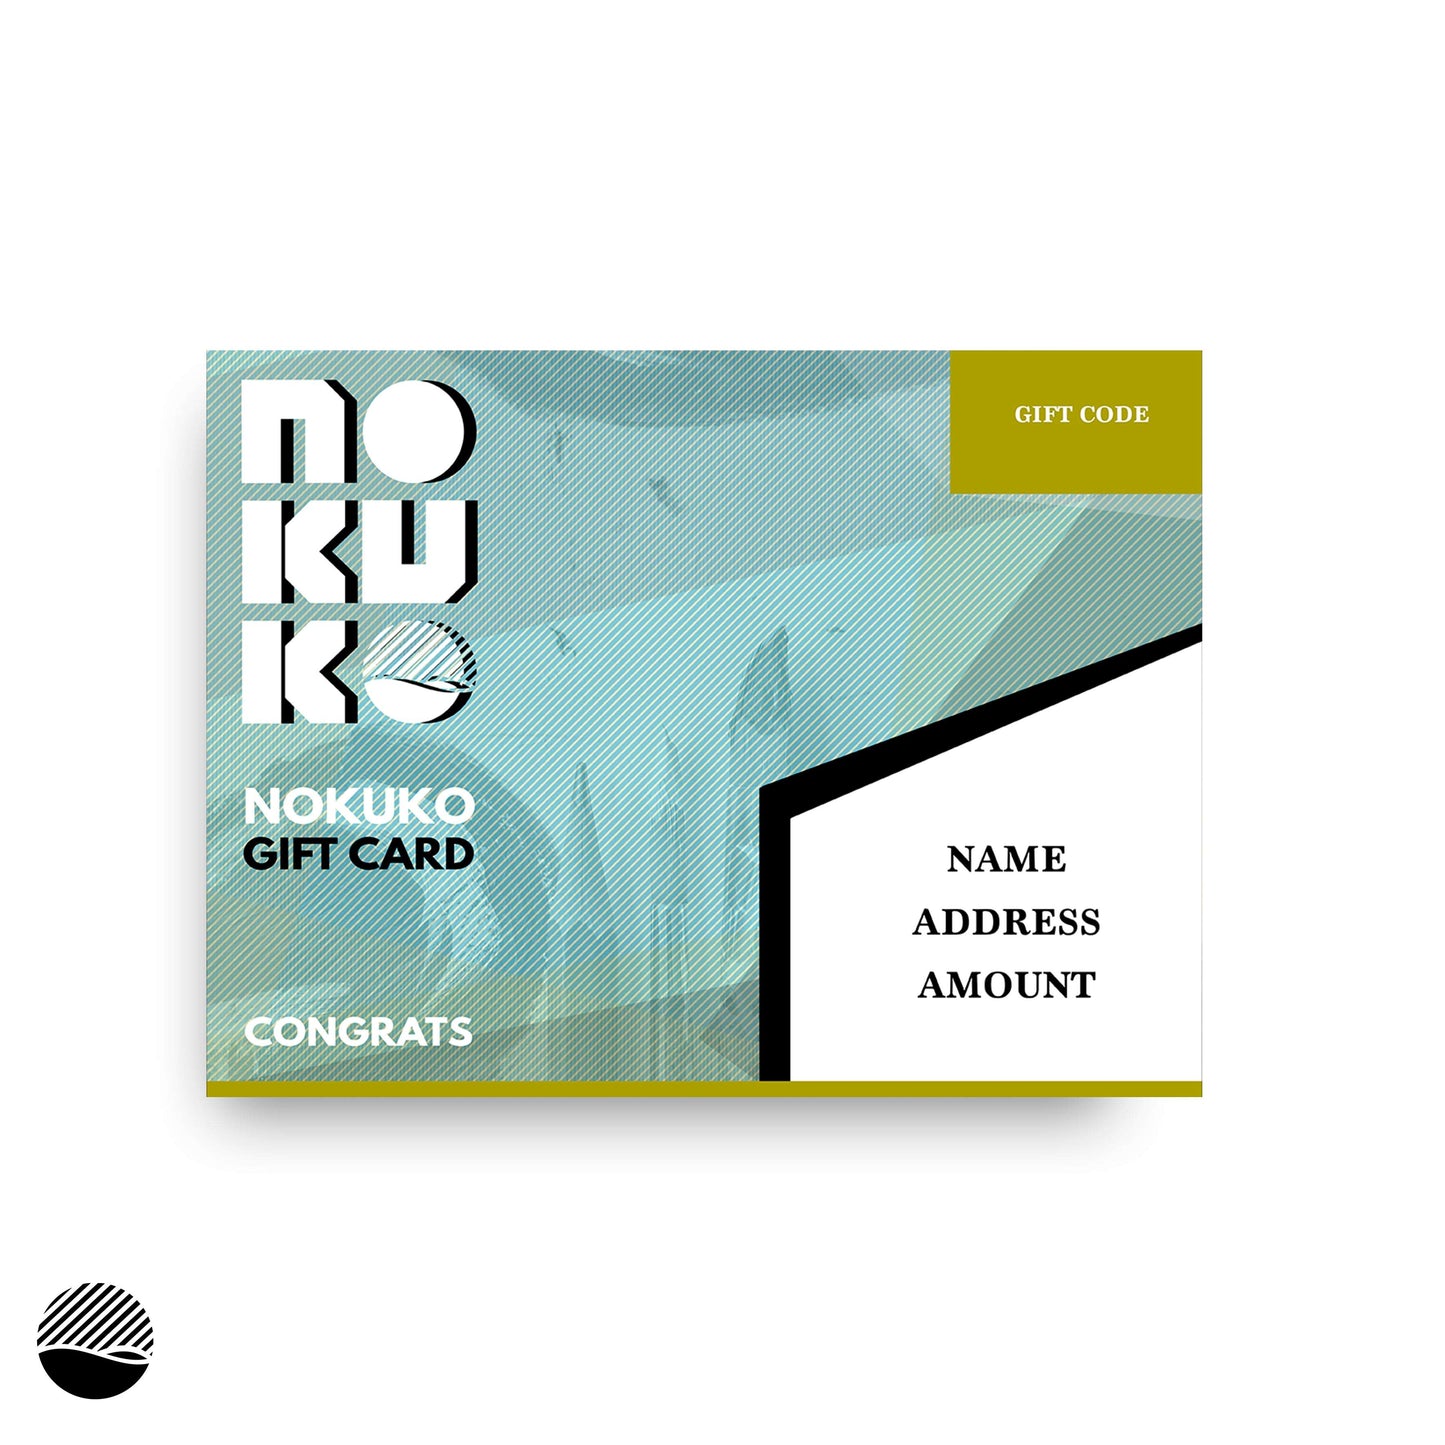 NOKUKO gift card to our entire collection.